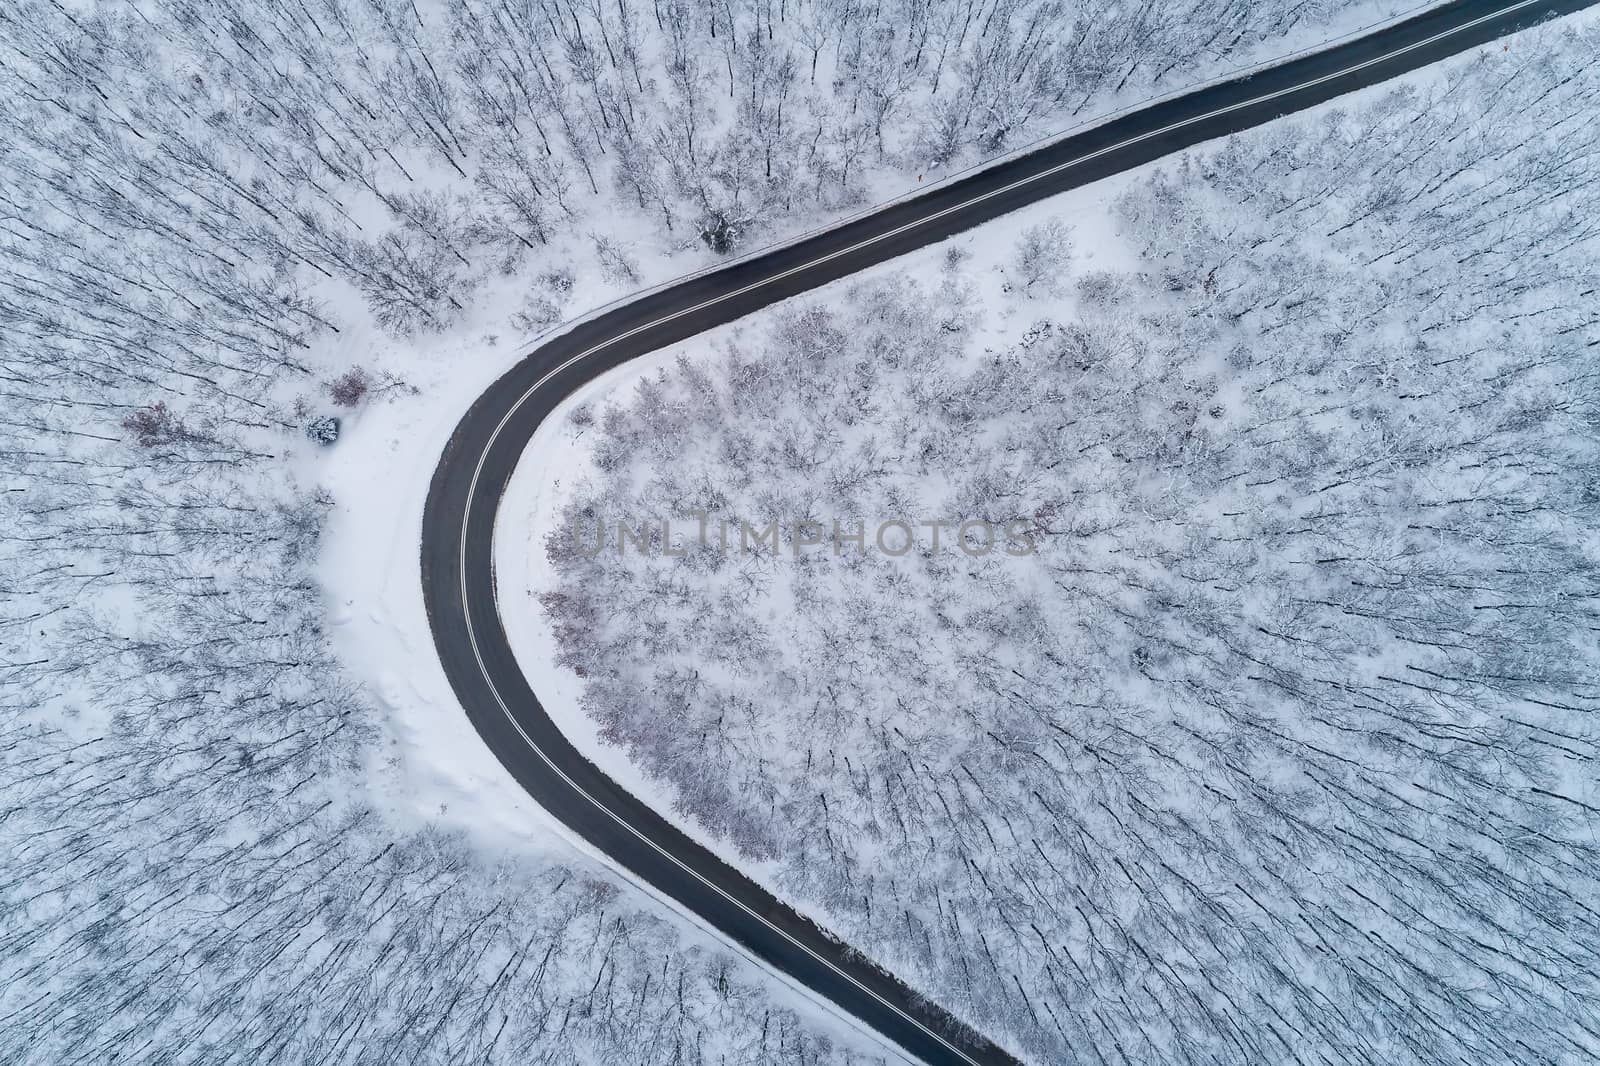 Aerial view of a provincial road passing through a snowy forest  by ververidis